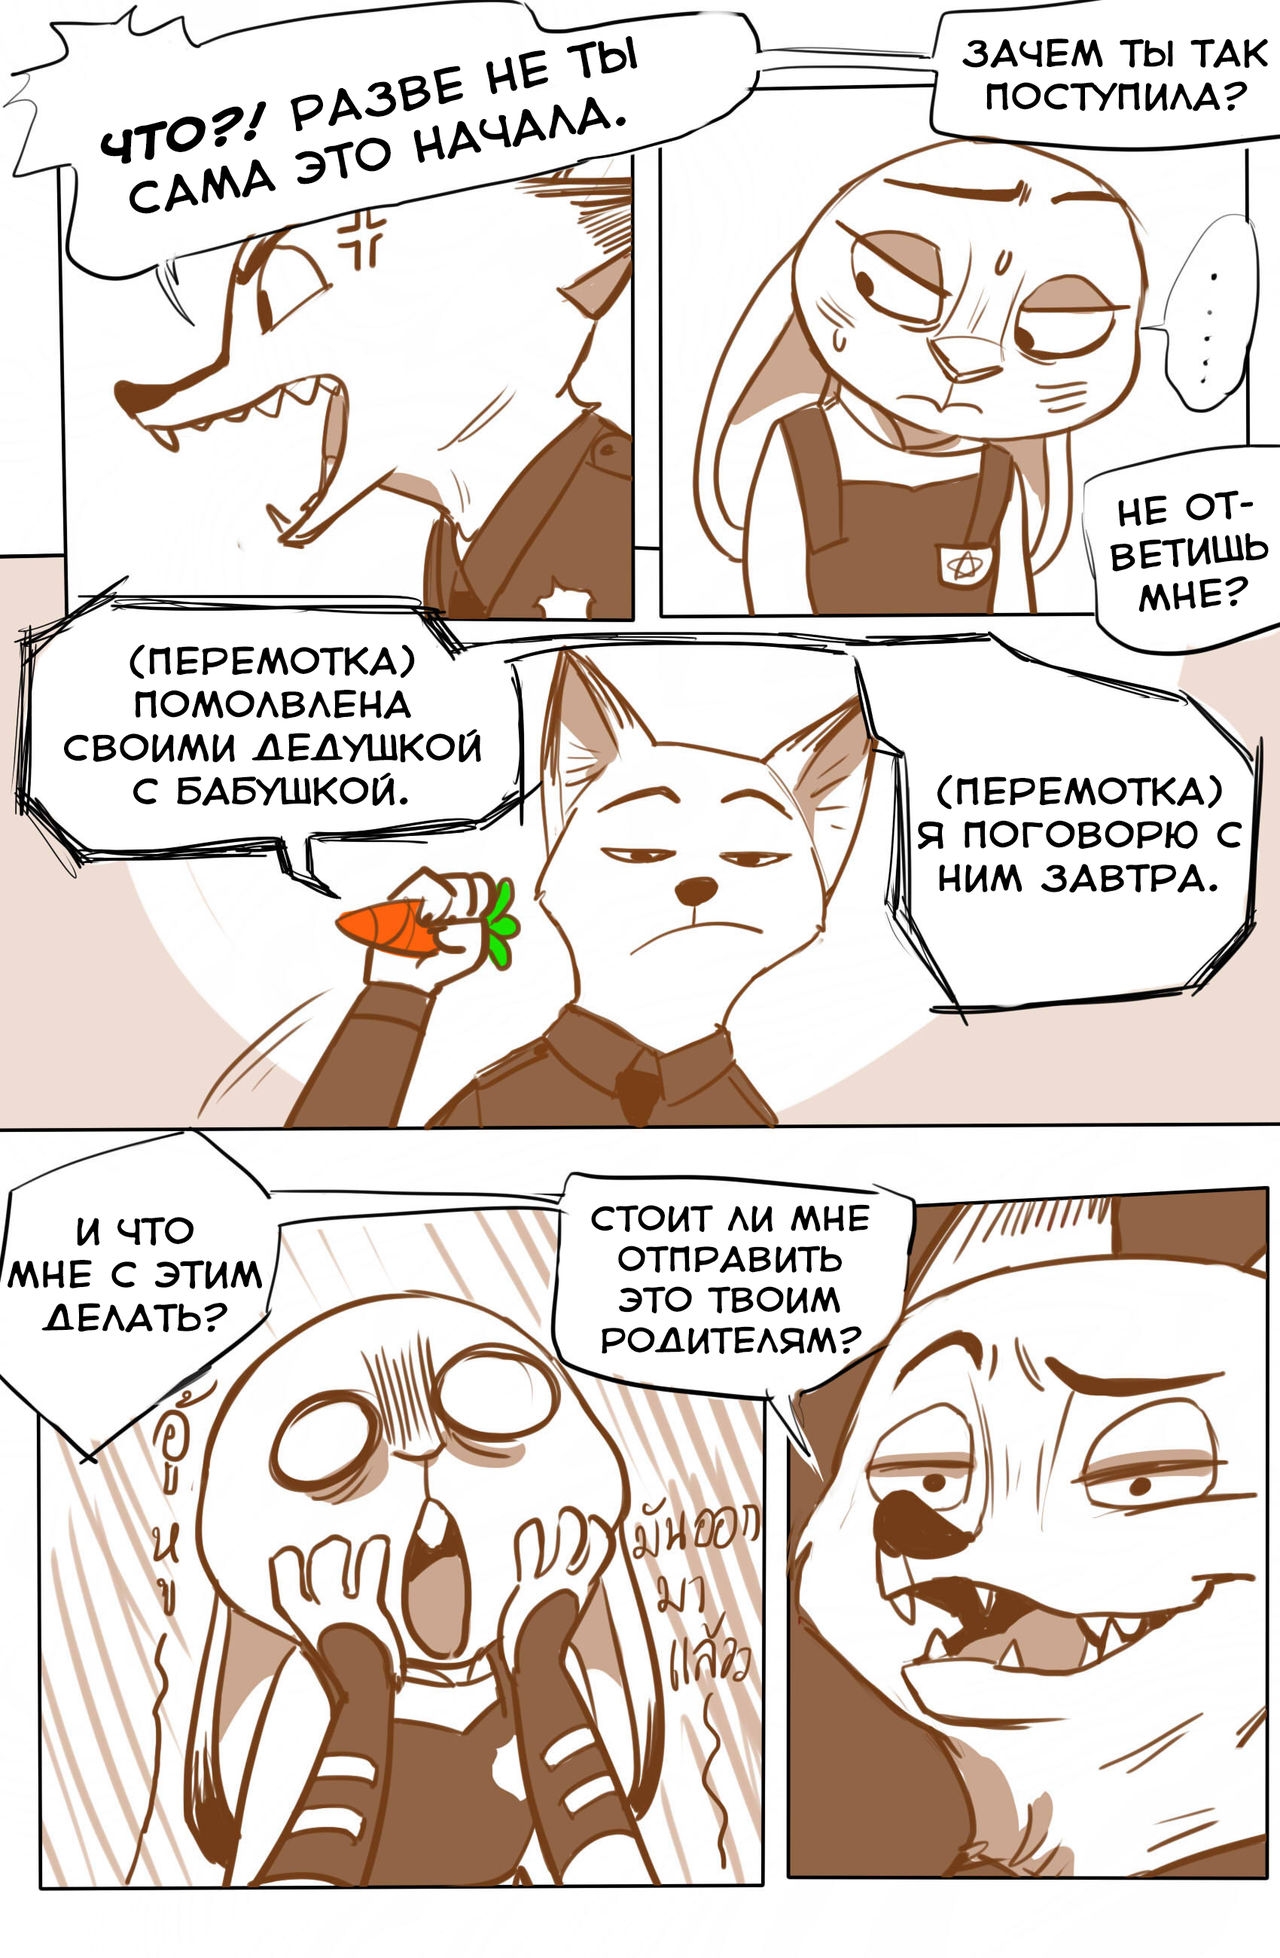 [lupinchopang27] Nick and Judy's the story (Zootopia) [Russian] [metalslayer] 16